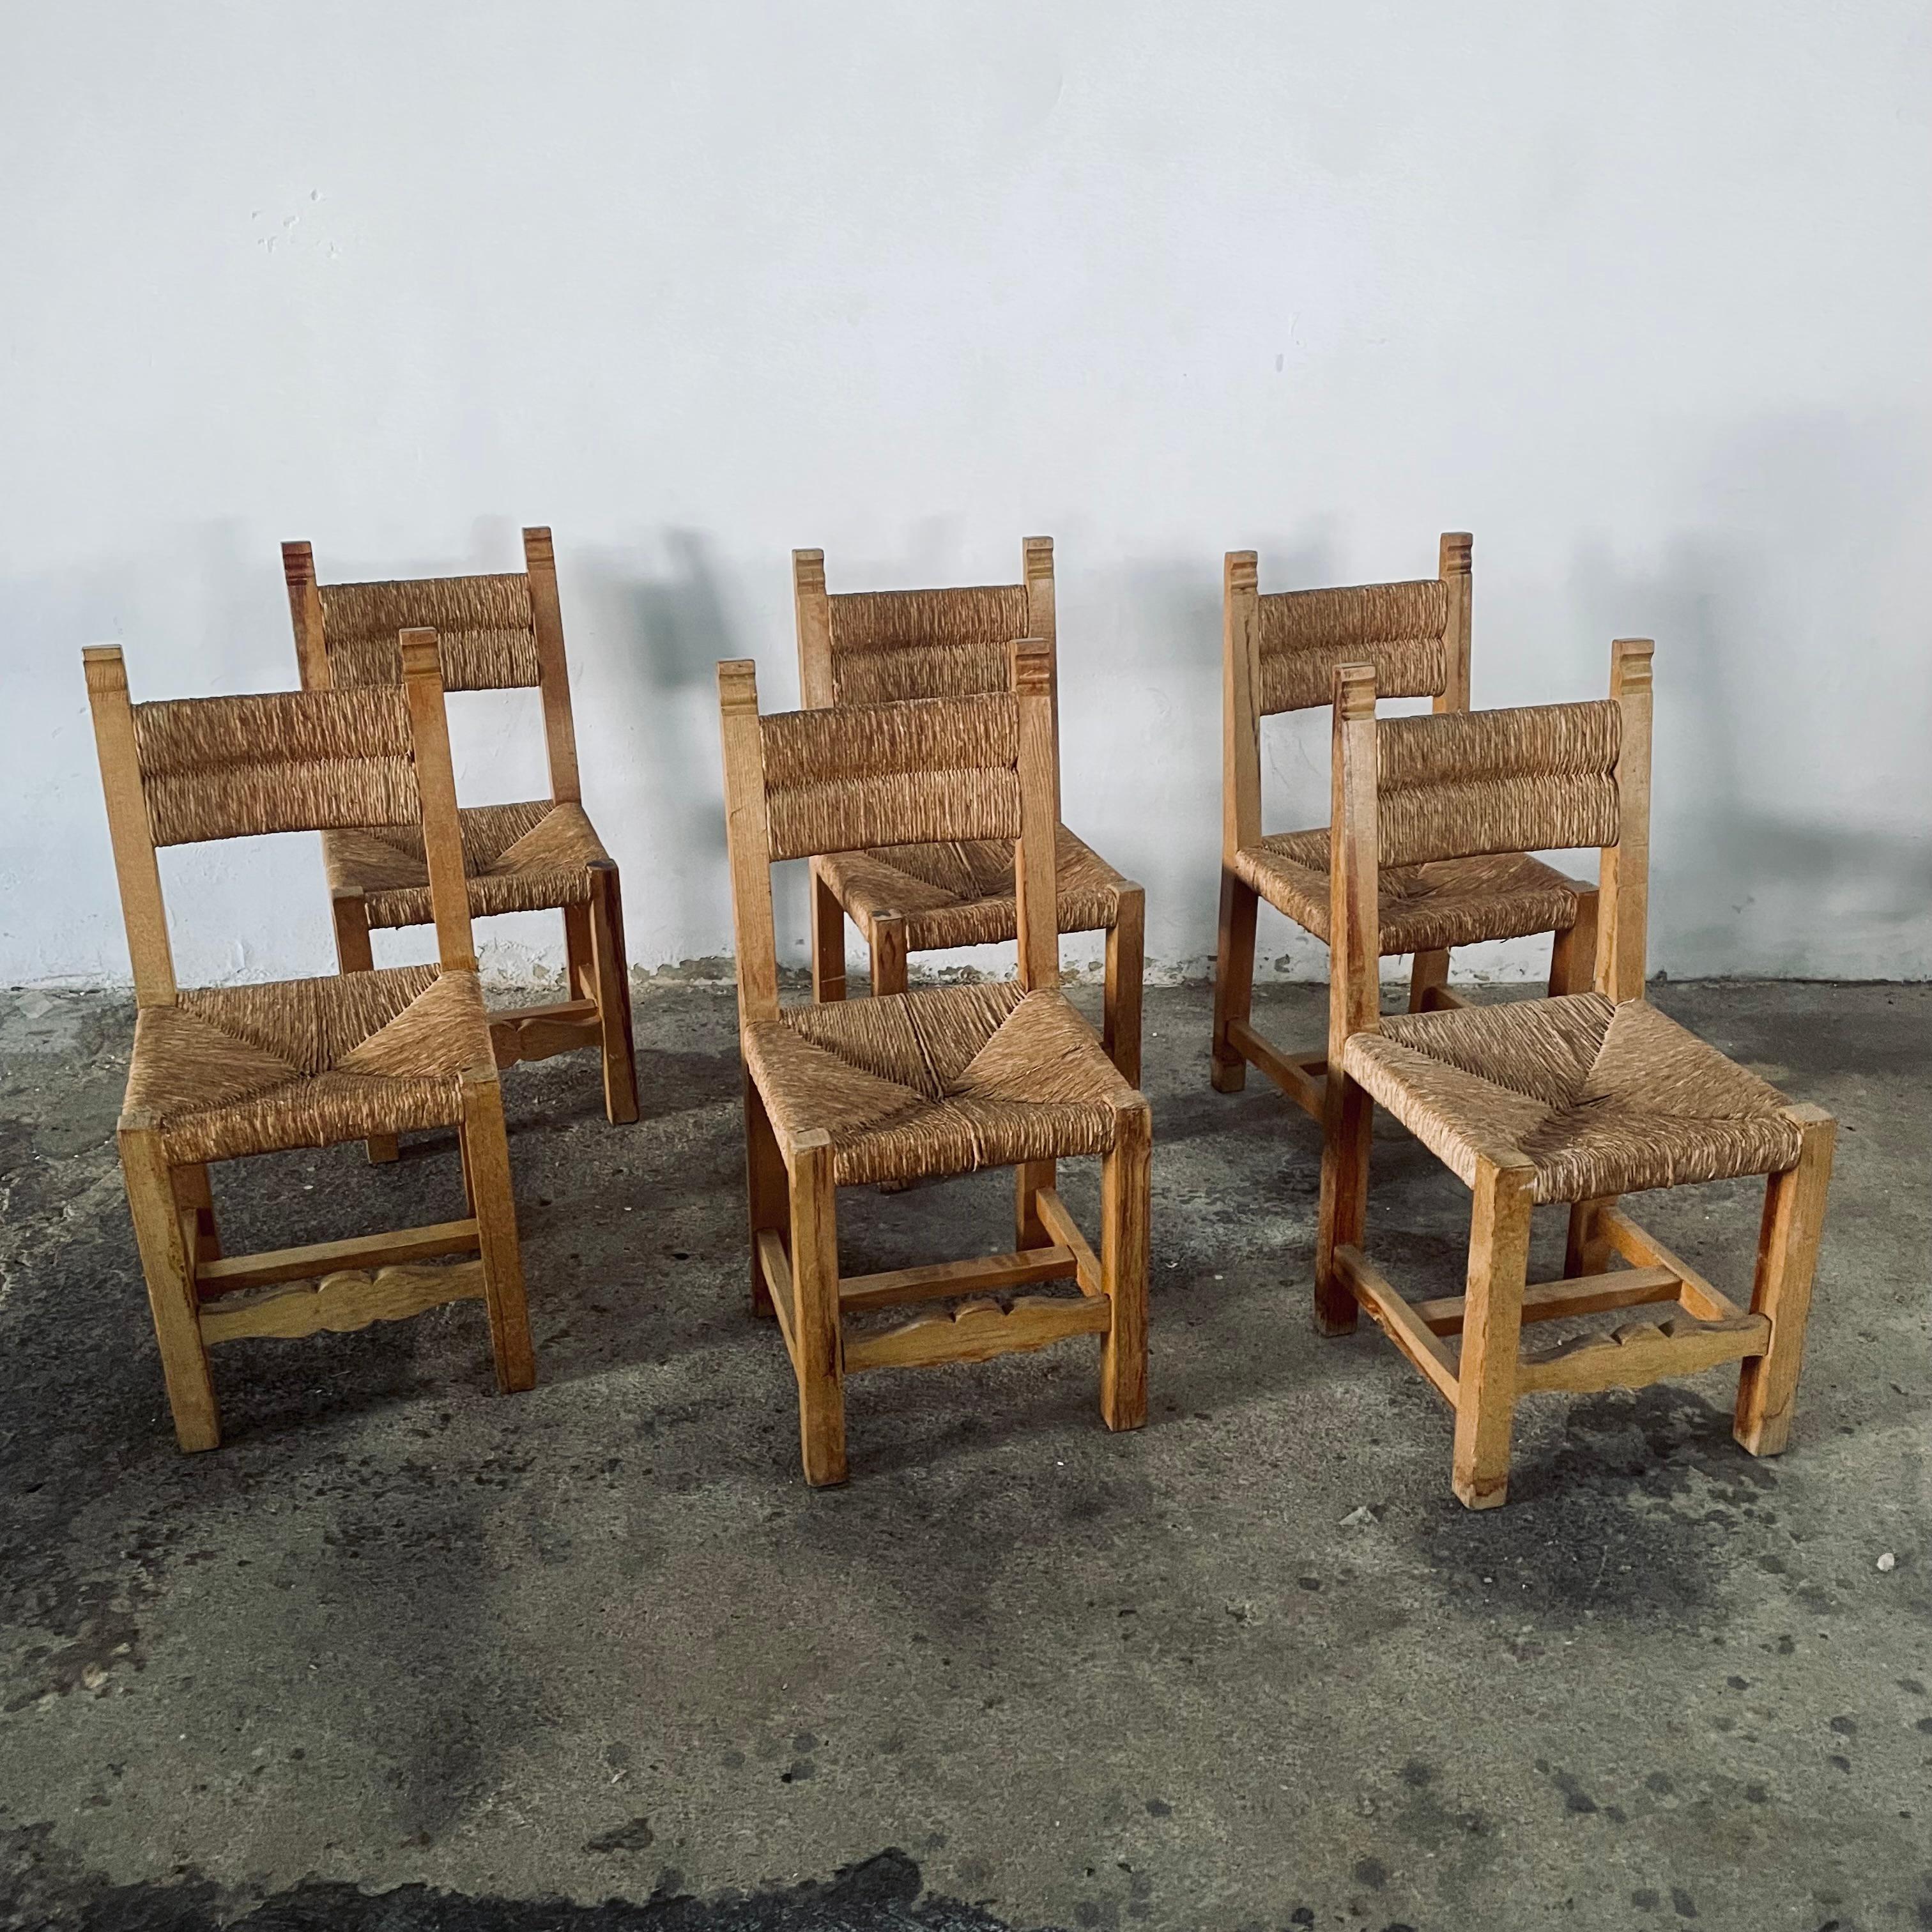 Set of 6 Vintage French Charles Dudouyt style country wicker or rush Seat Chairs, original condition, This vintage set remains fully functional, and it shows signs of age through scuffs, dings, faded finishes, some Rush seats and backs defects,